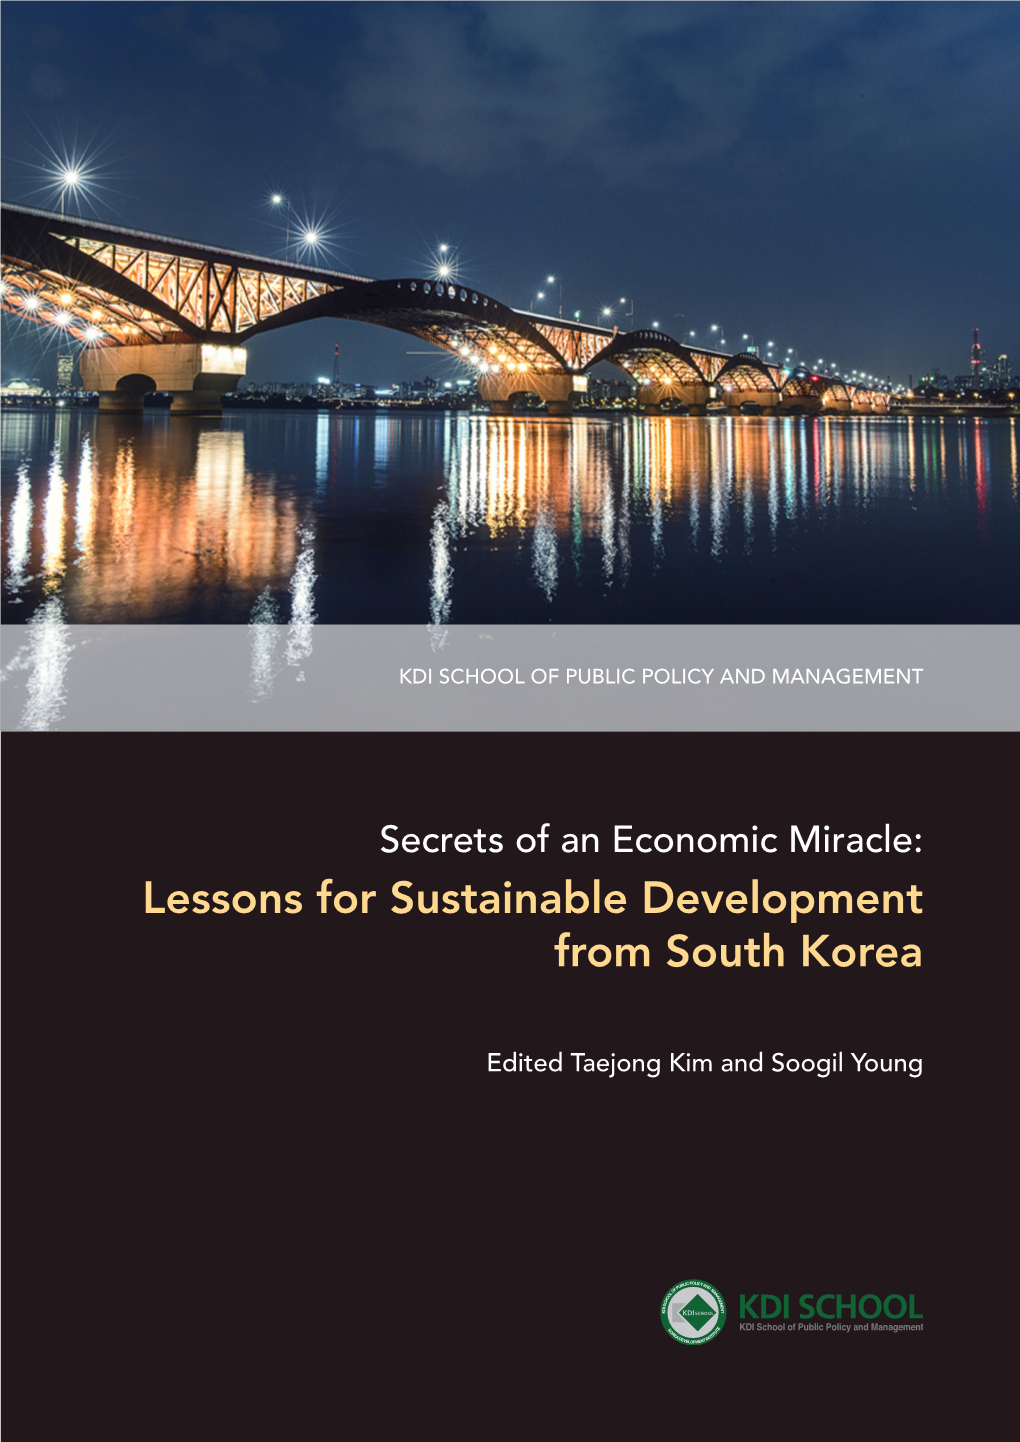 Lessons for Sustainable Development from South Korea